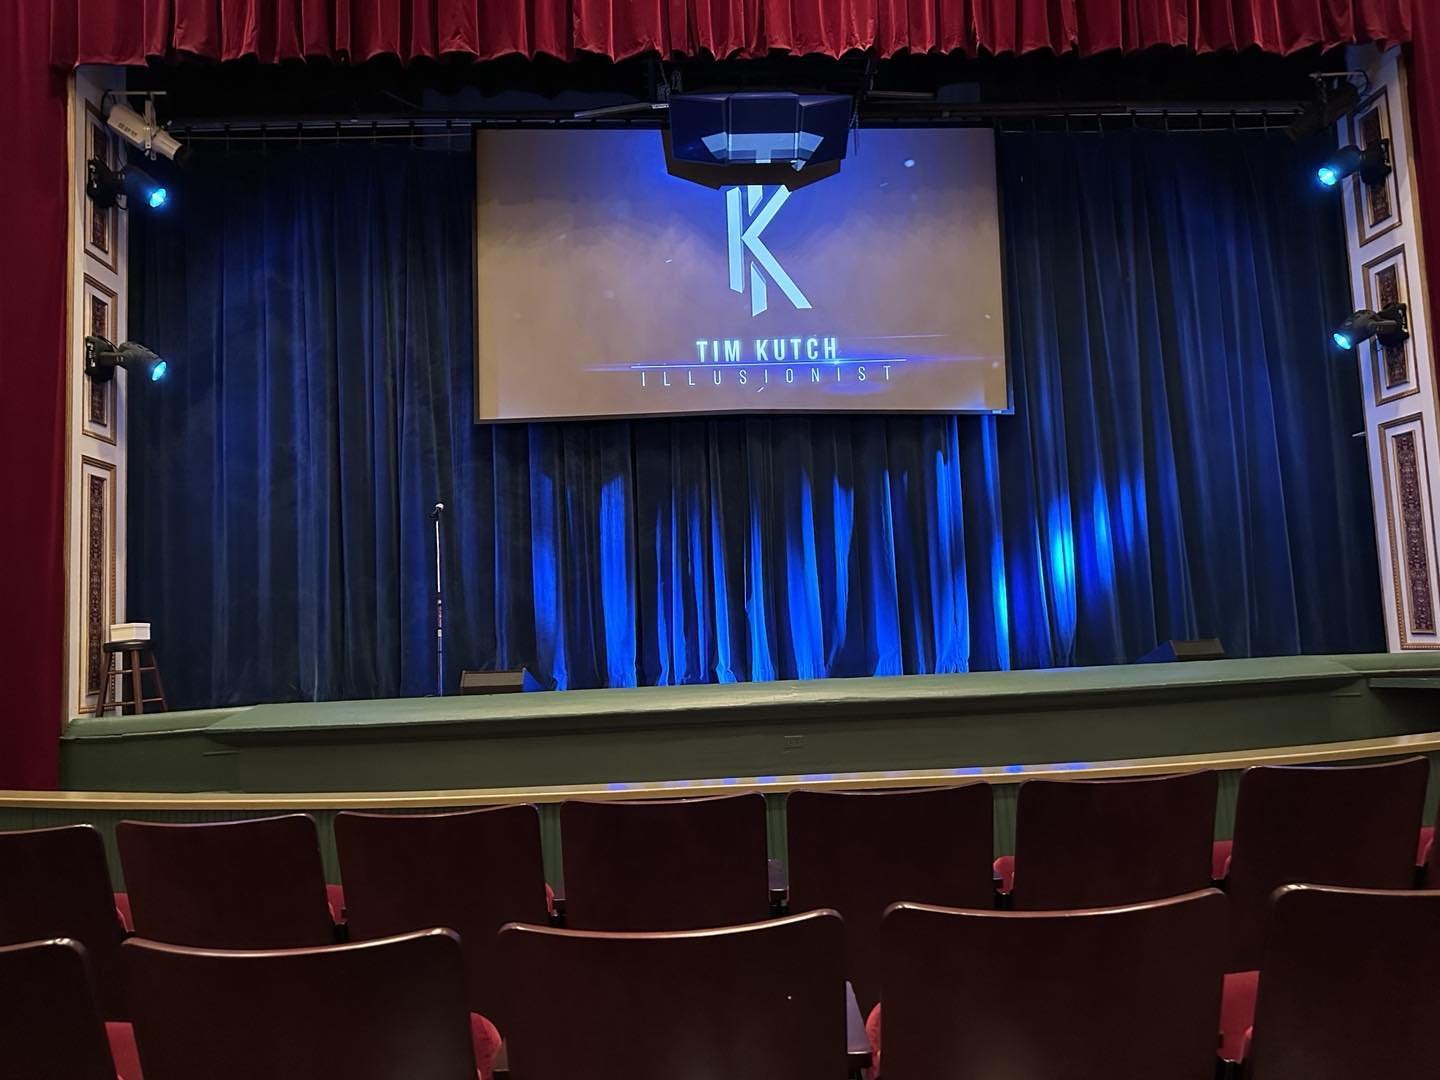 Stage view from the audience 

#magician #magic #illusionist #illusion #keynotespeaker #Pittsburgh